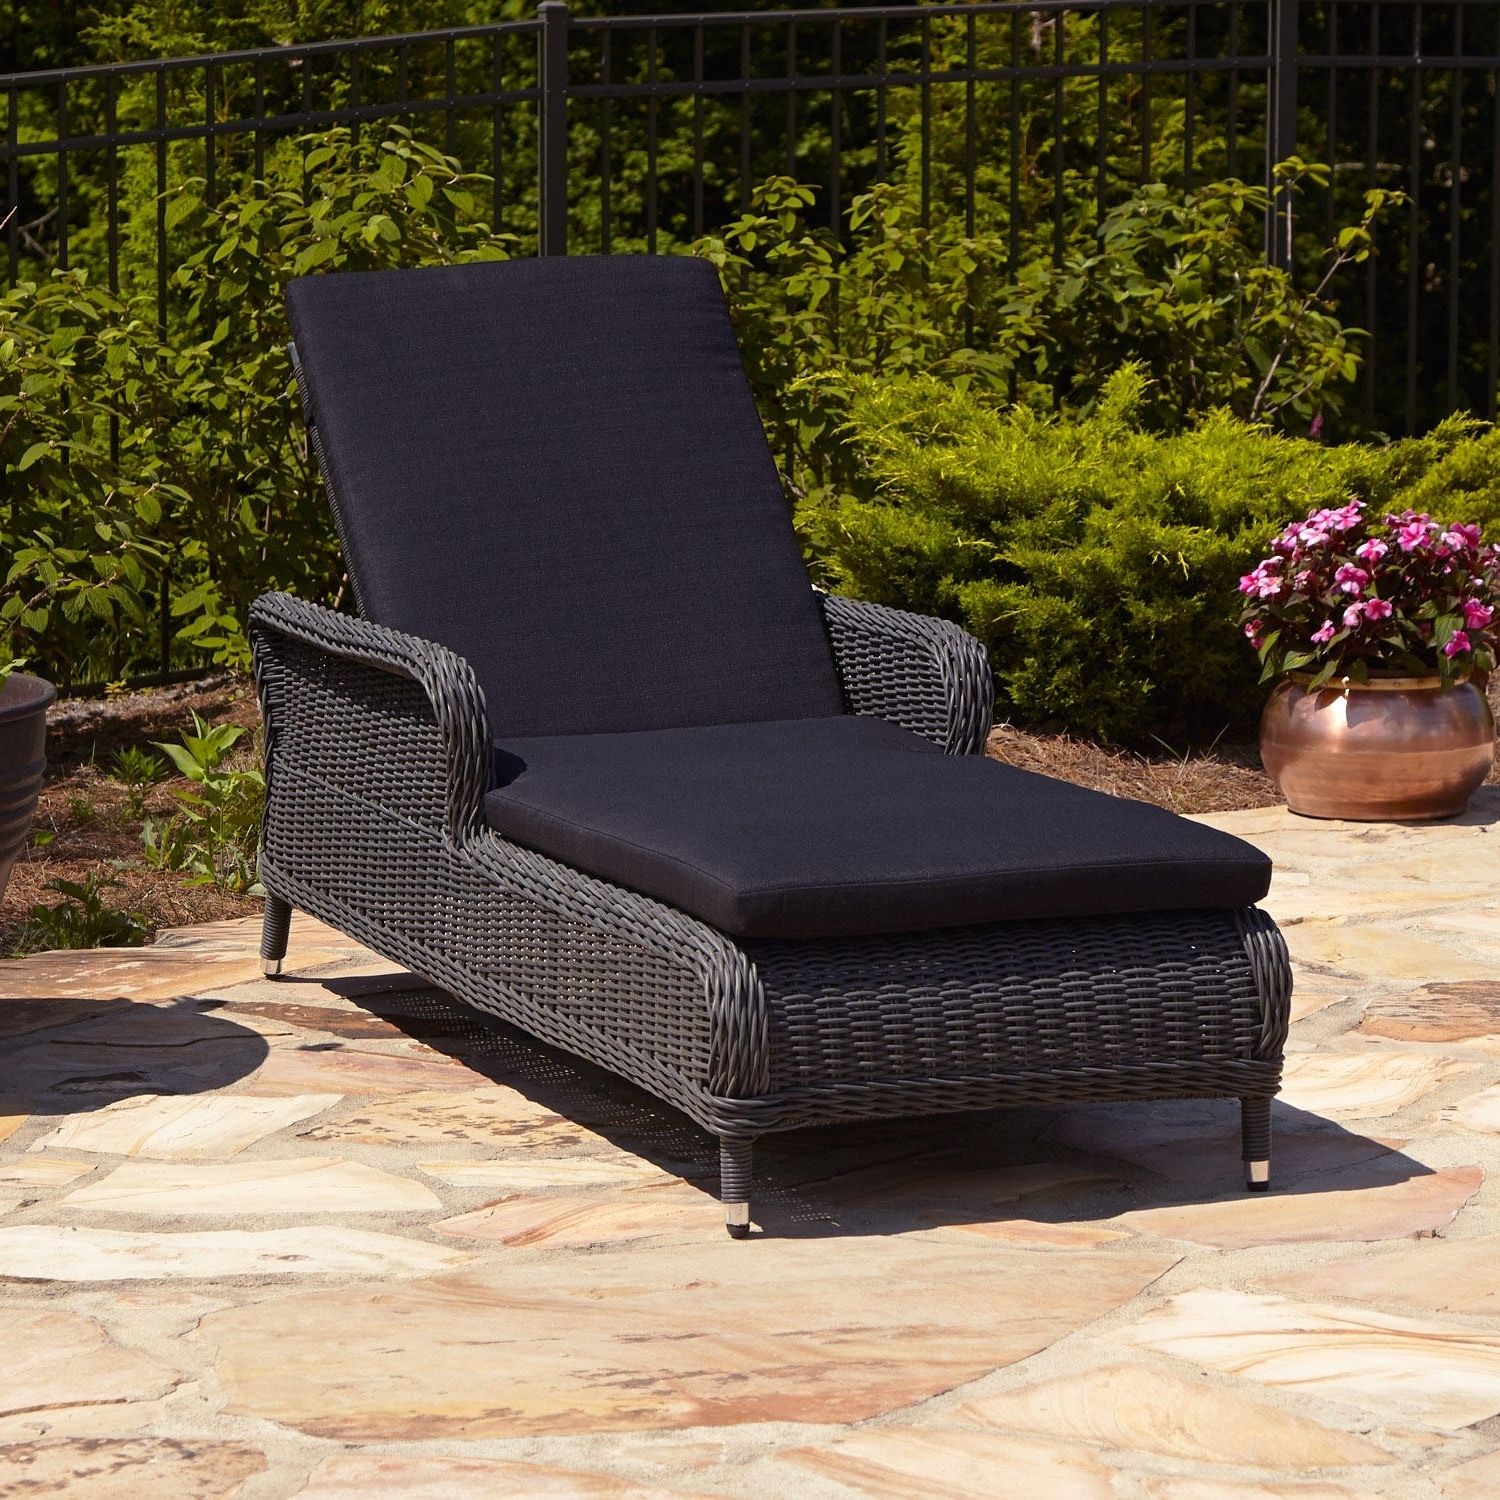 Most Recently Released Wicker Chaise Lounge Chairs For Outdoor Within Remarkable Wicker Chaise Lounge Chair Gray Patio Furniture All (View 1 of 15)